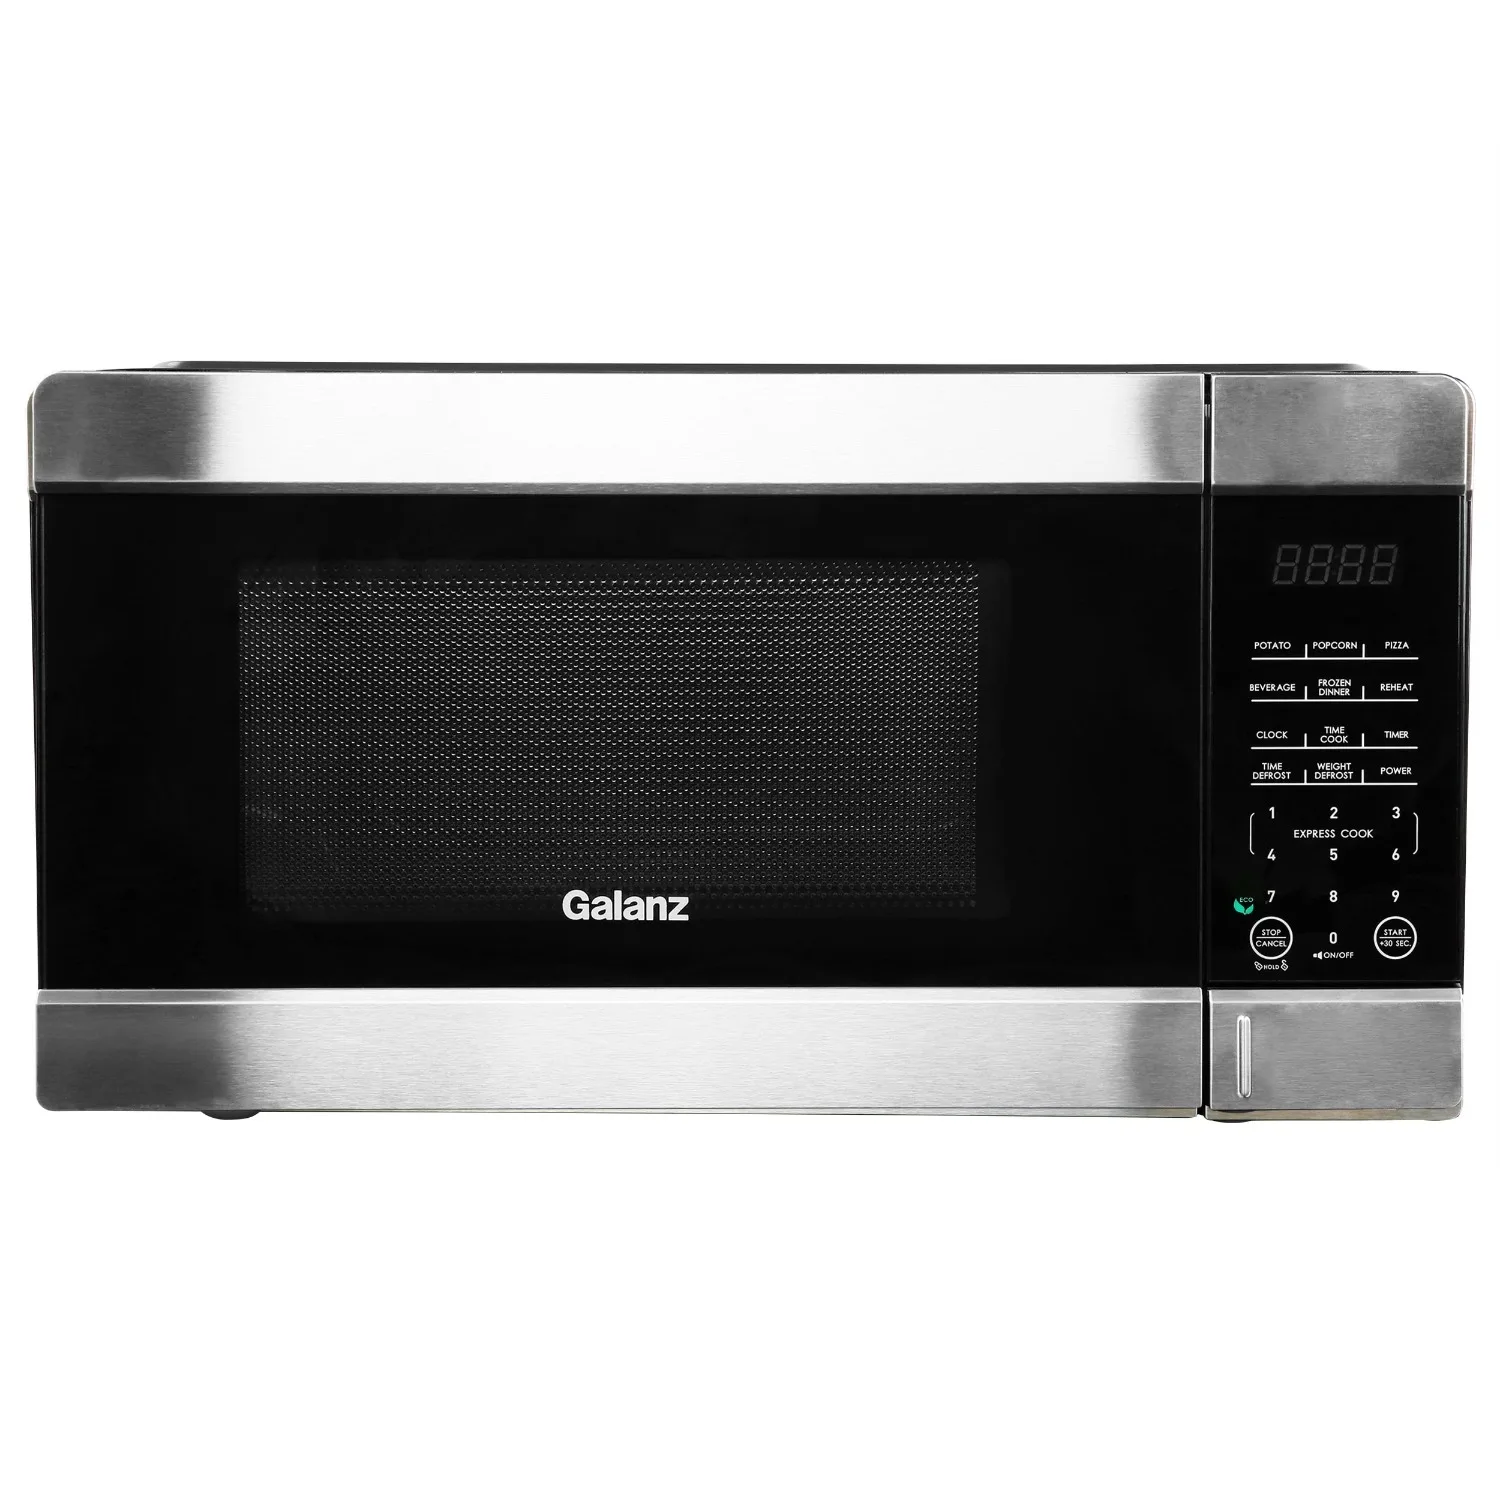 

Countertop Microwave Oven in Black with One Touch Express Cooking hornos microondas